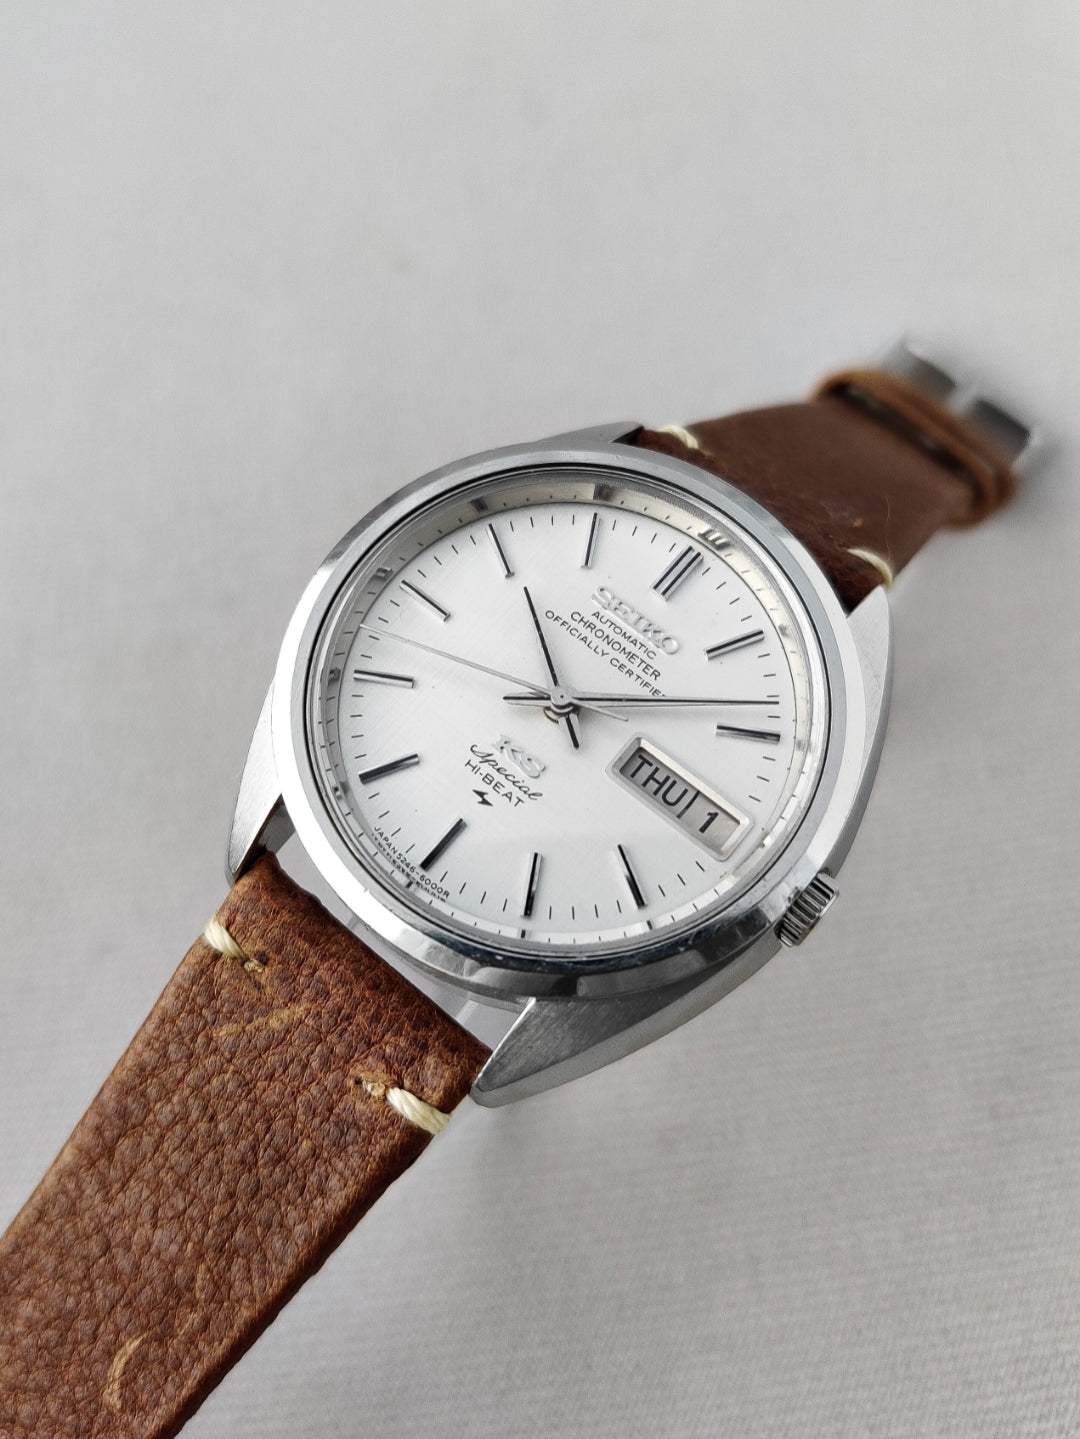 King Seiko Chronometer Special 5246-6000 from 1973 (Serviced)